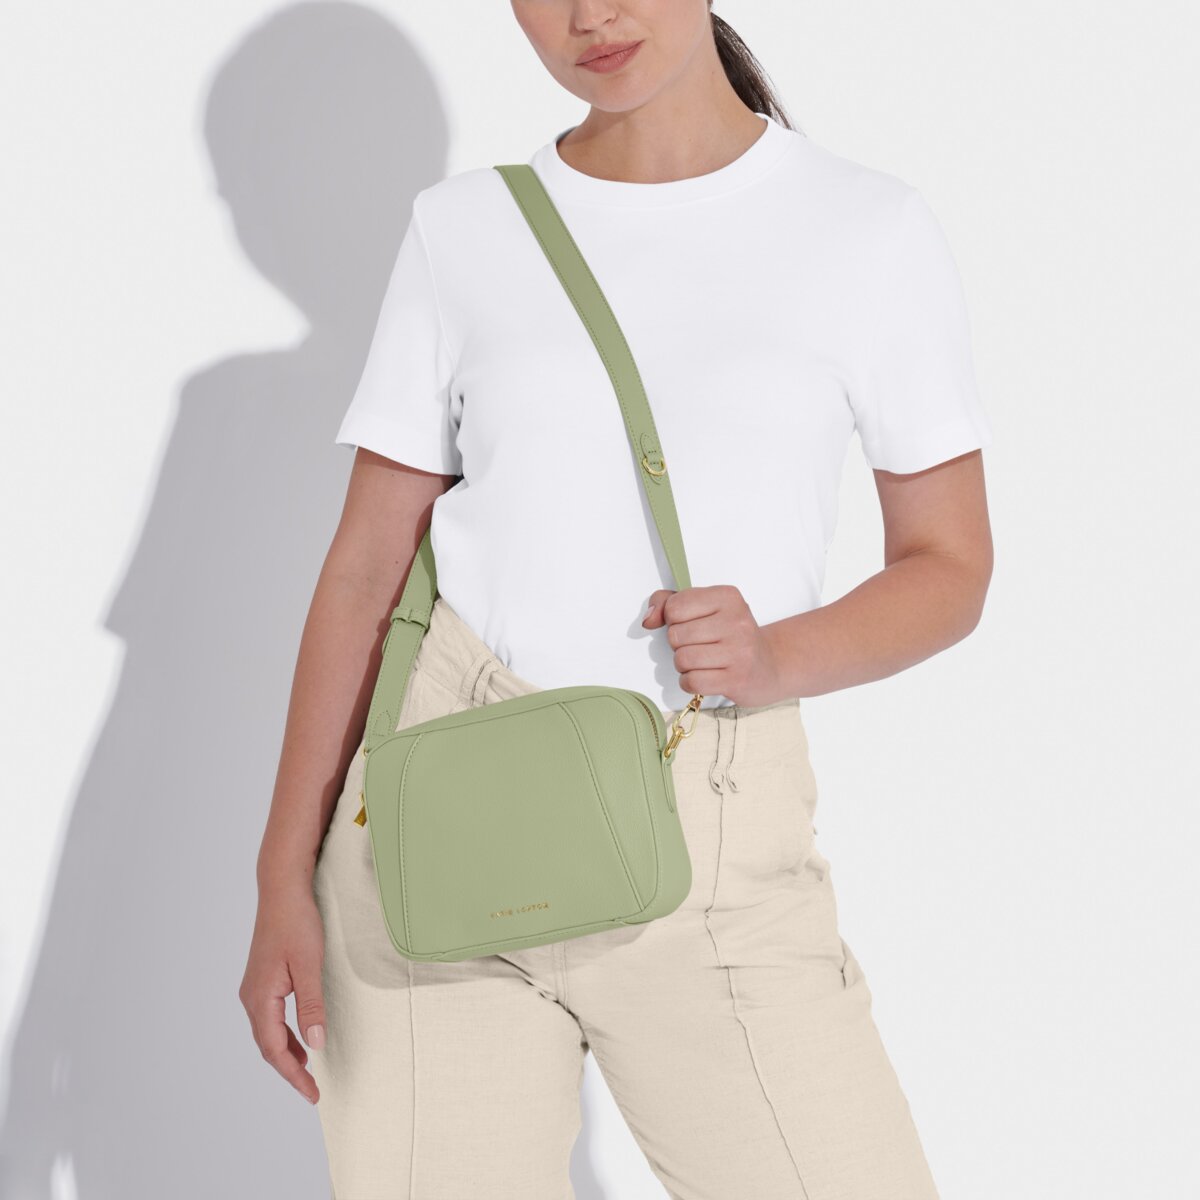 Model in a white t-shirt and cream trousers with the Crossbody handbag in soft sage greeen